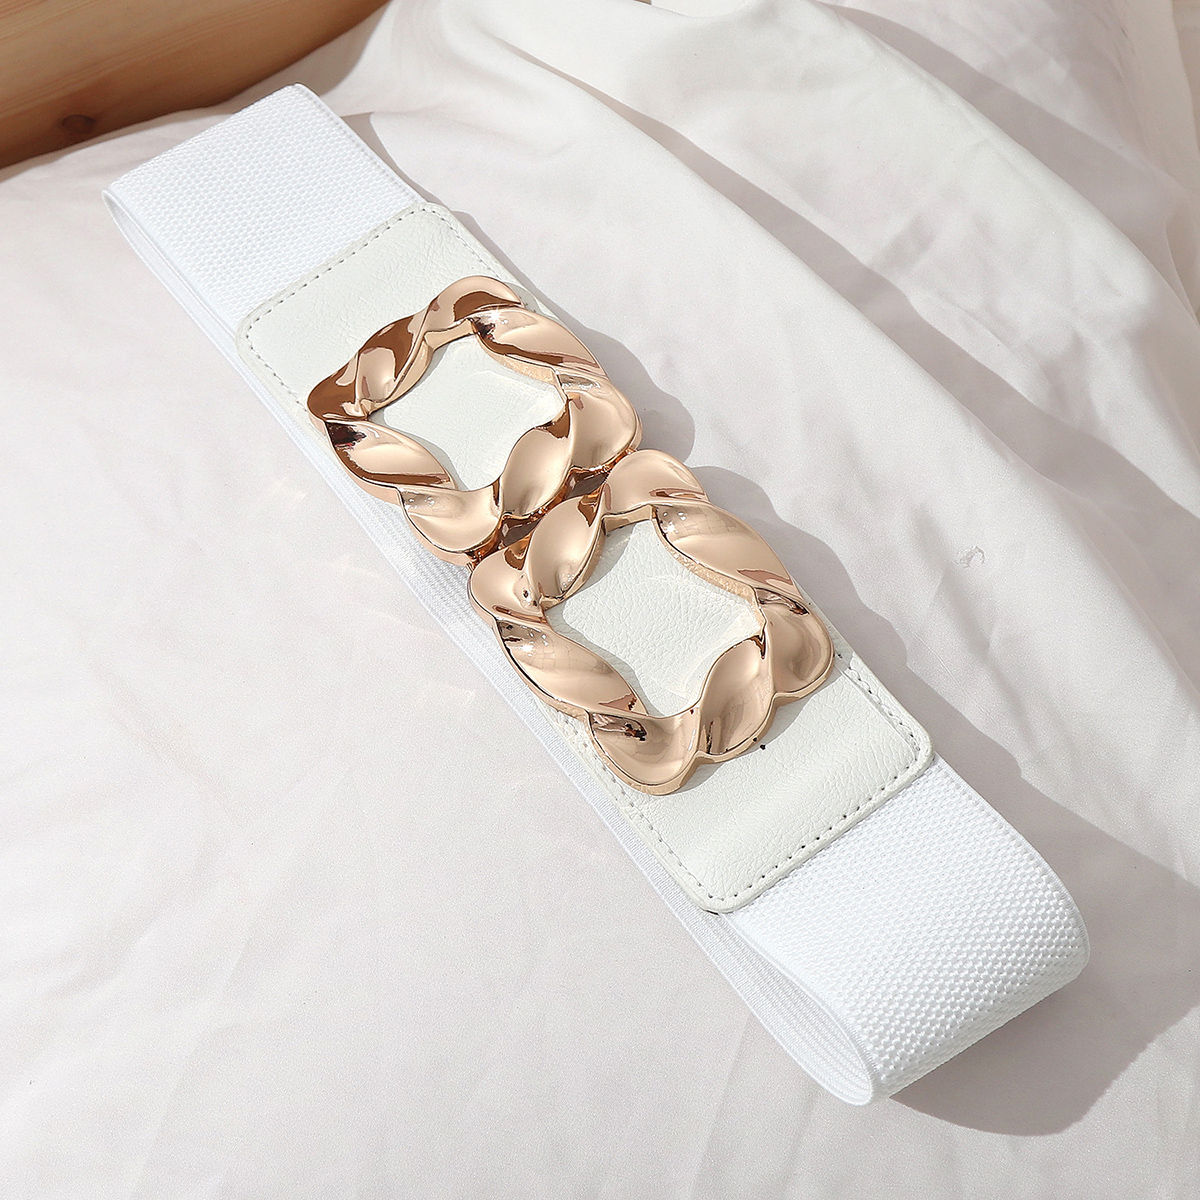 Chic White Patterned Gold Square Interlock Buckle Belt